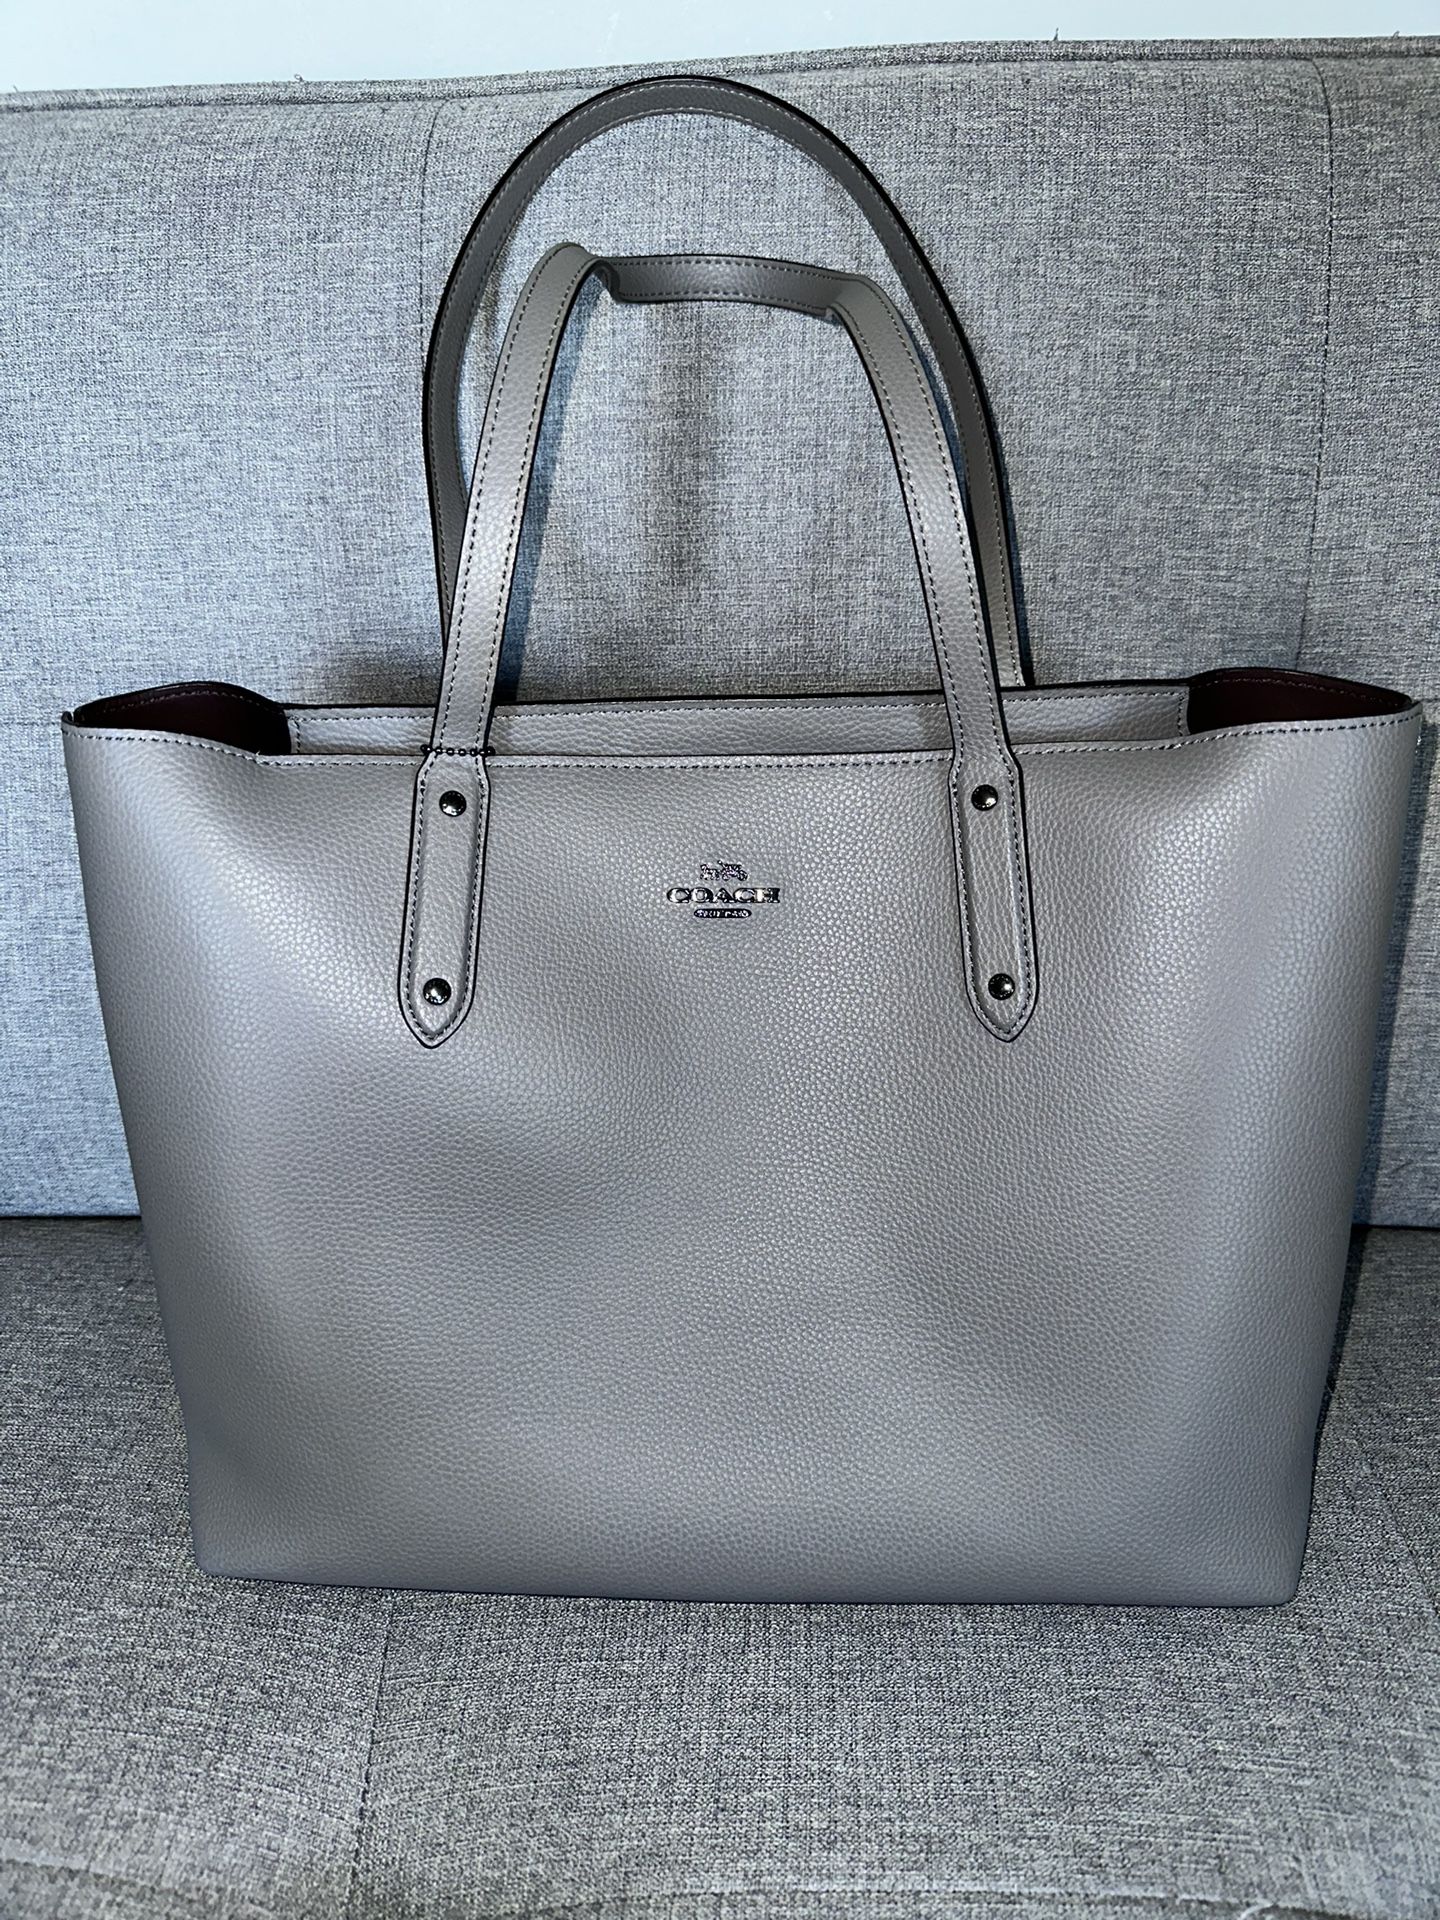 Gray Coach Tote Bag - Great For Travel/Work Bag